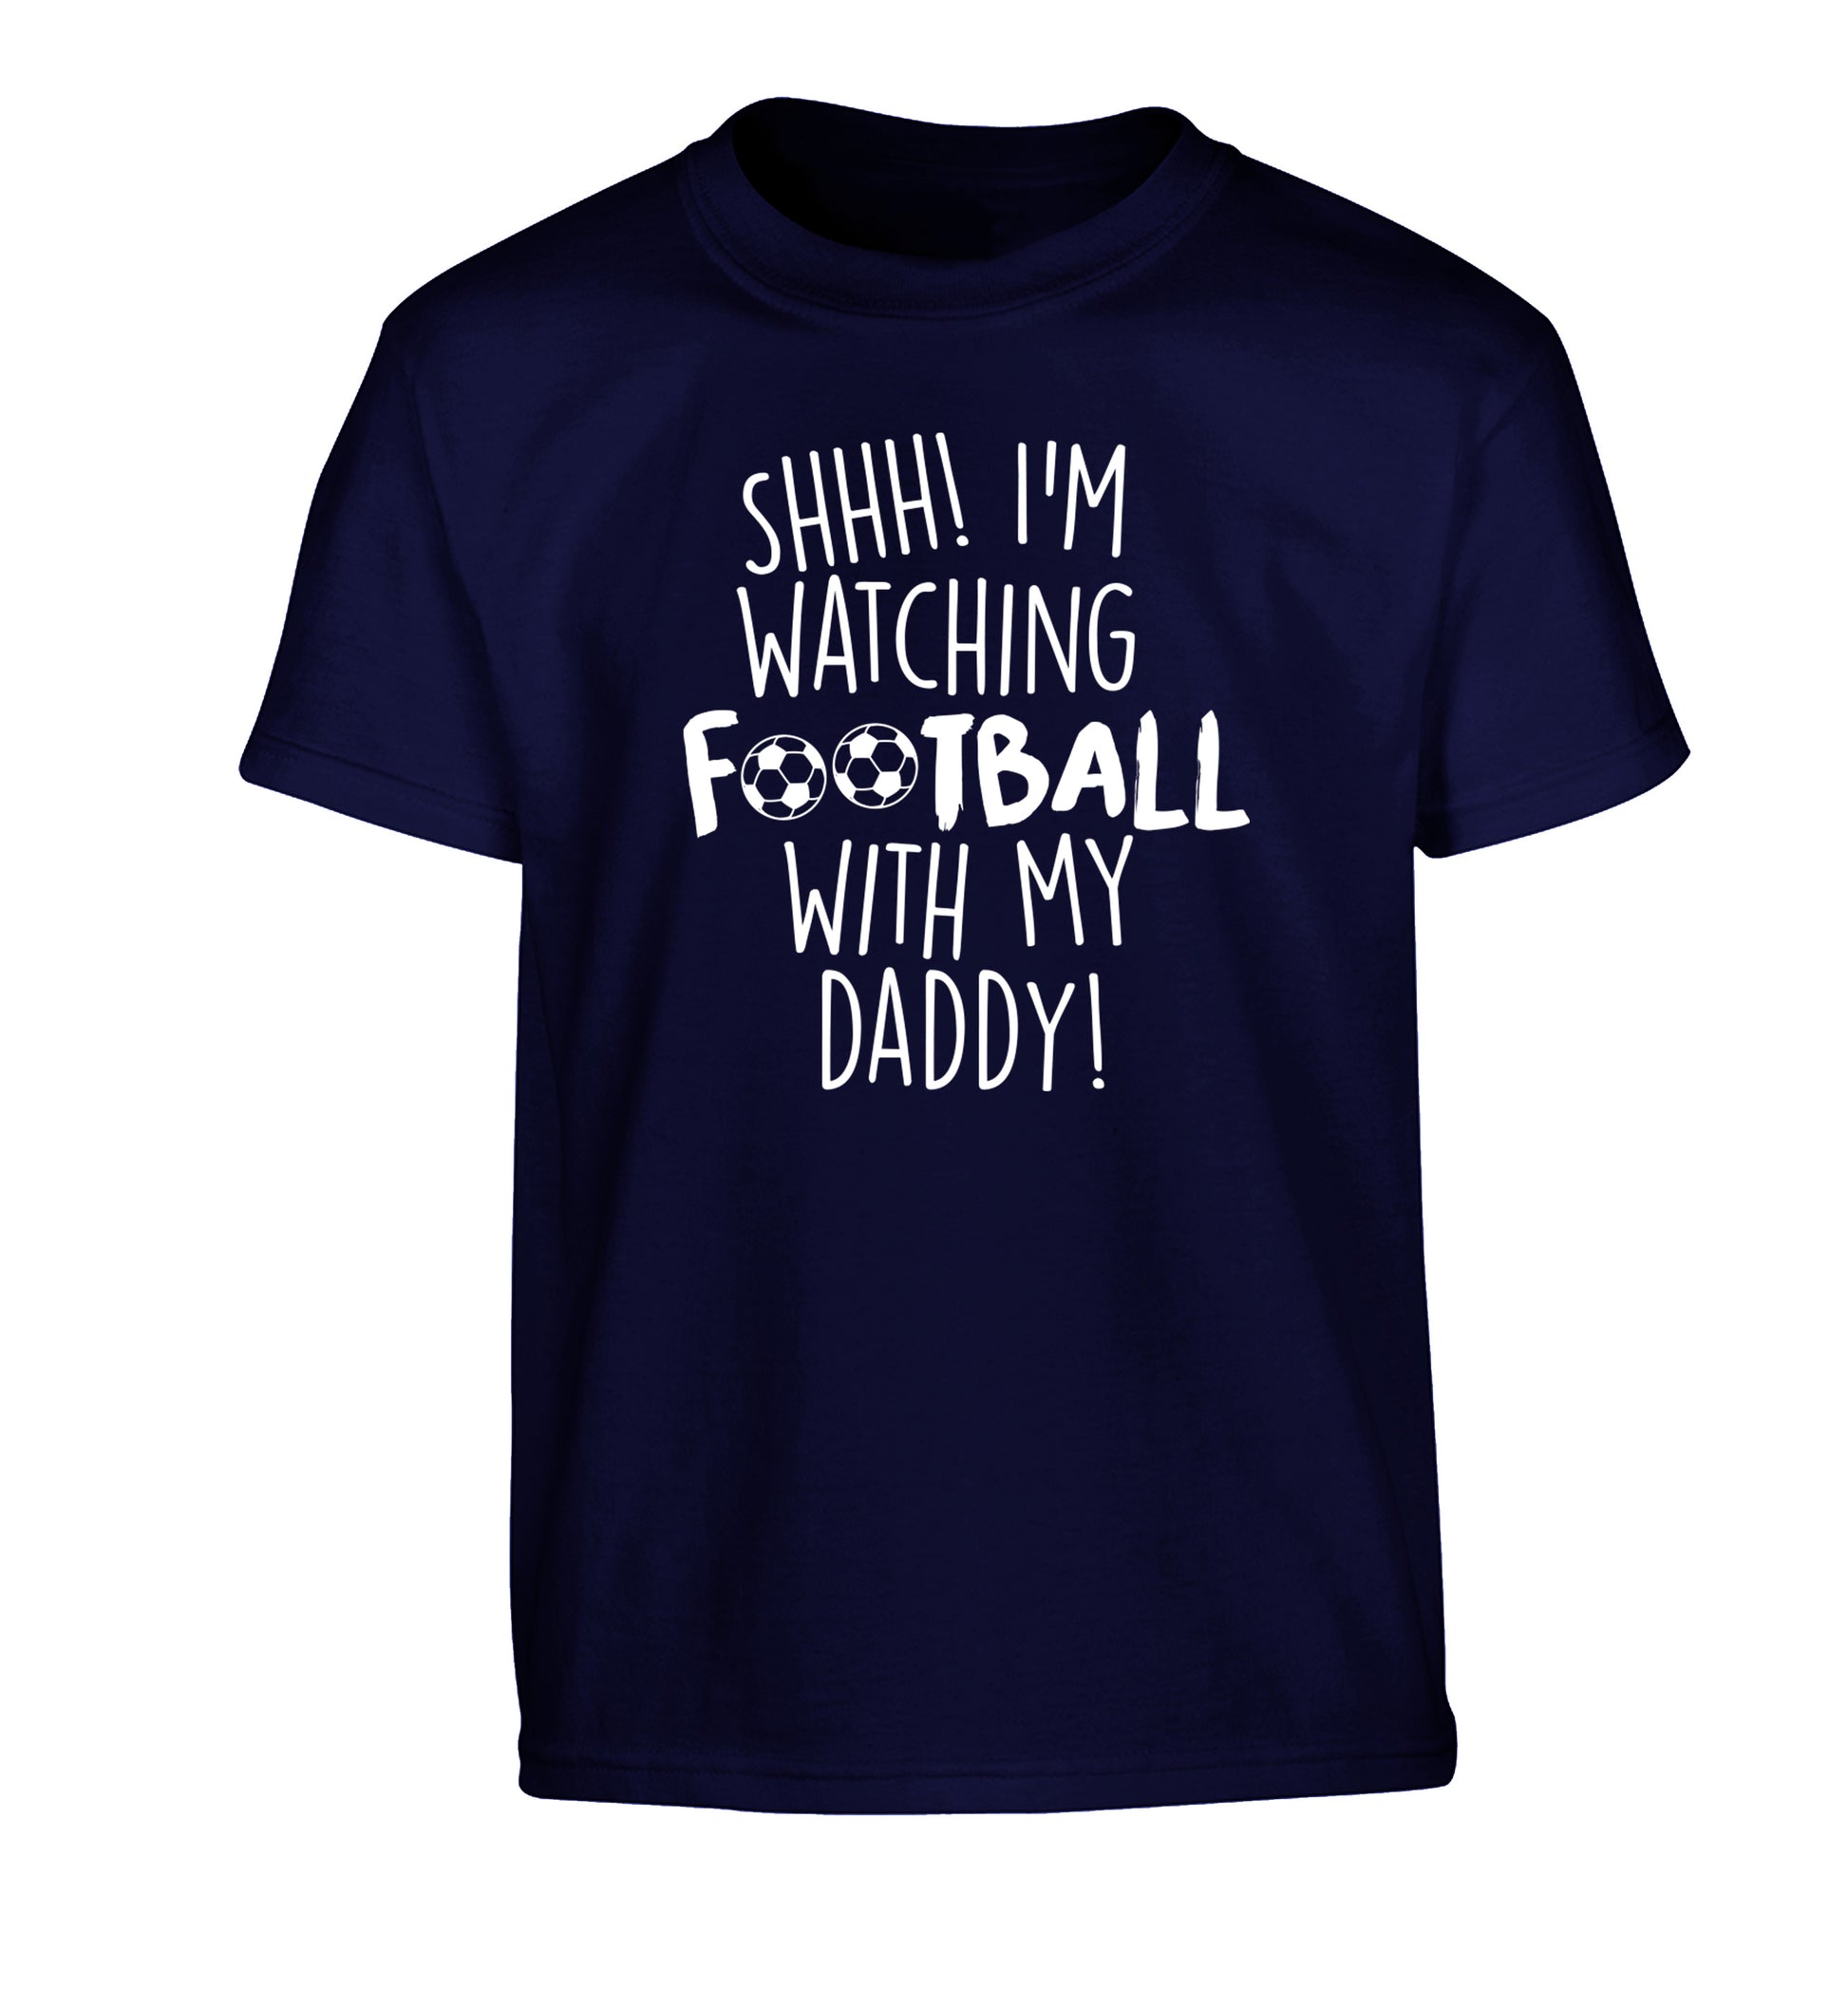 Shhh I'm watching football with my daddy Children's navy Tshirt 12-14 Years